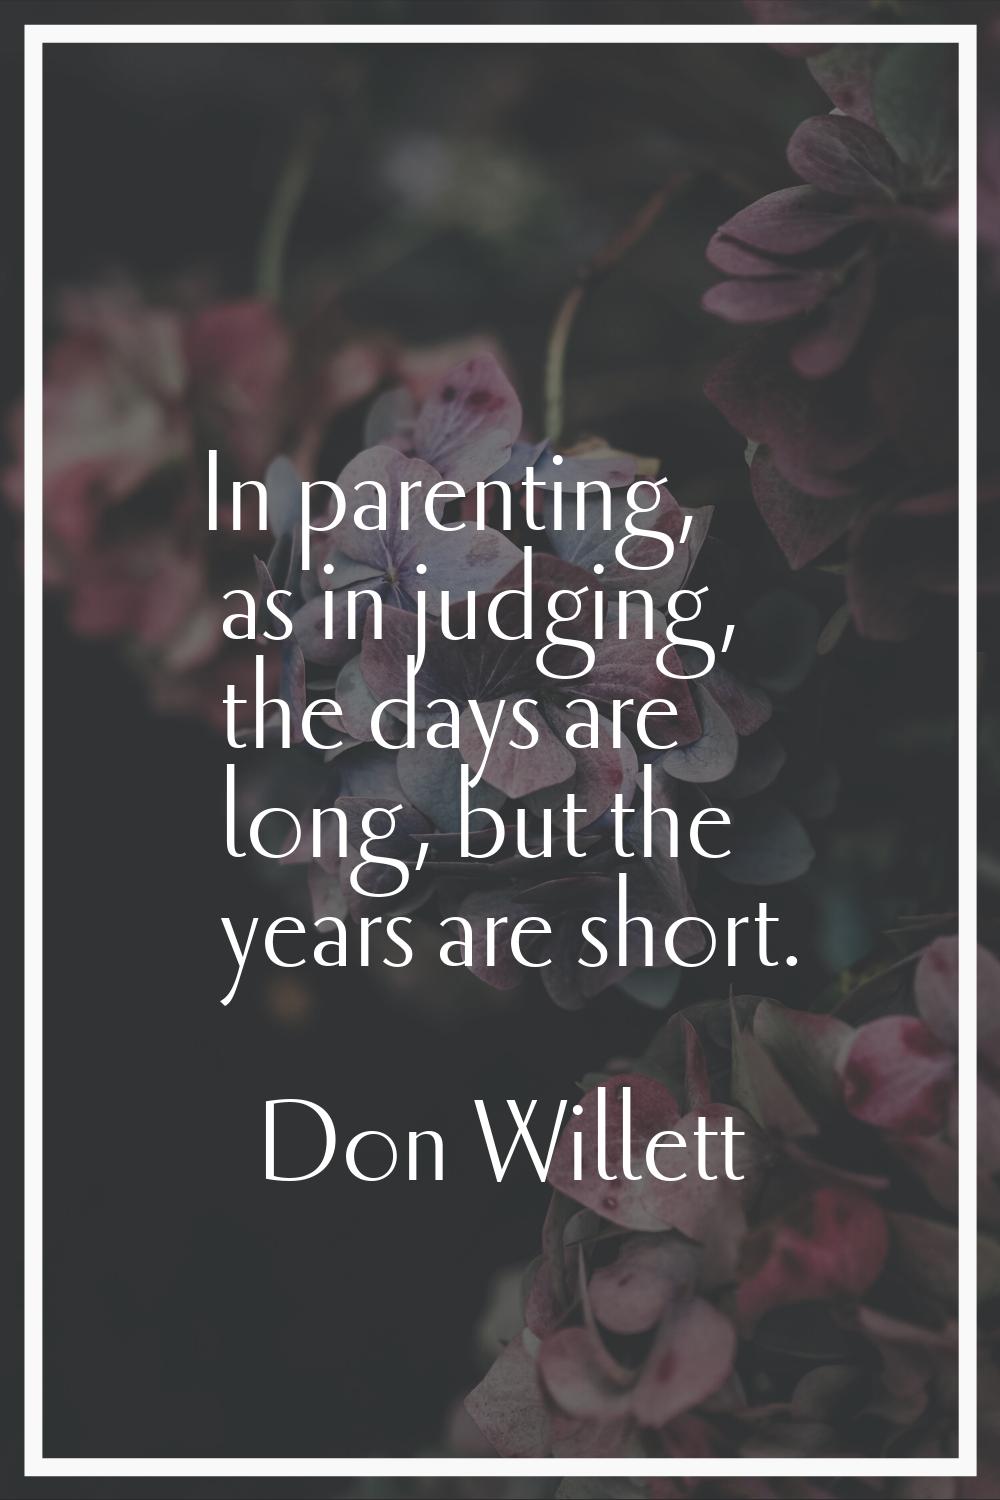 In parenting, as in judging, the days are long, but the years are short.